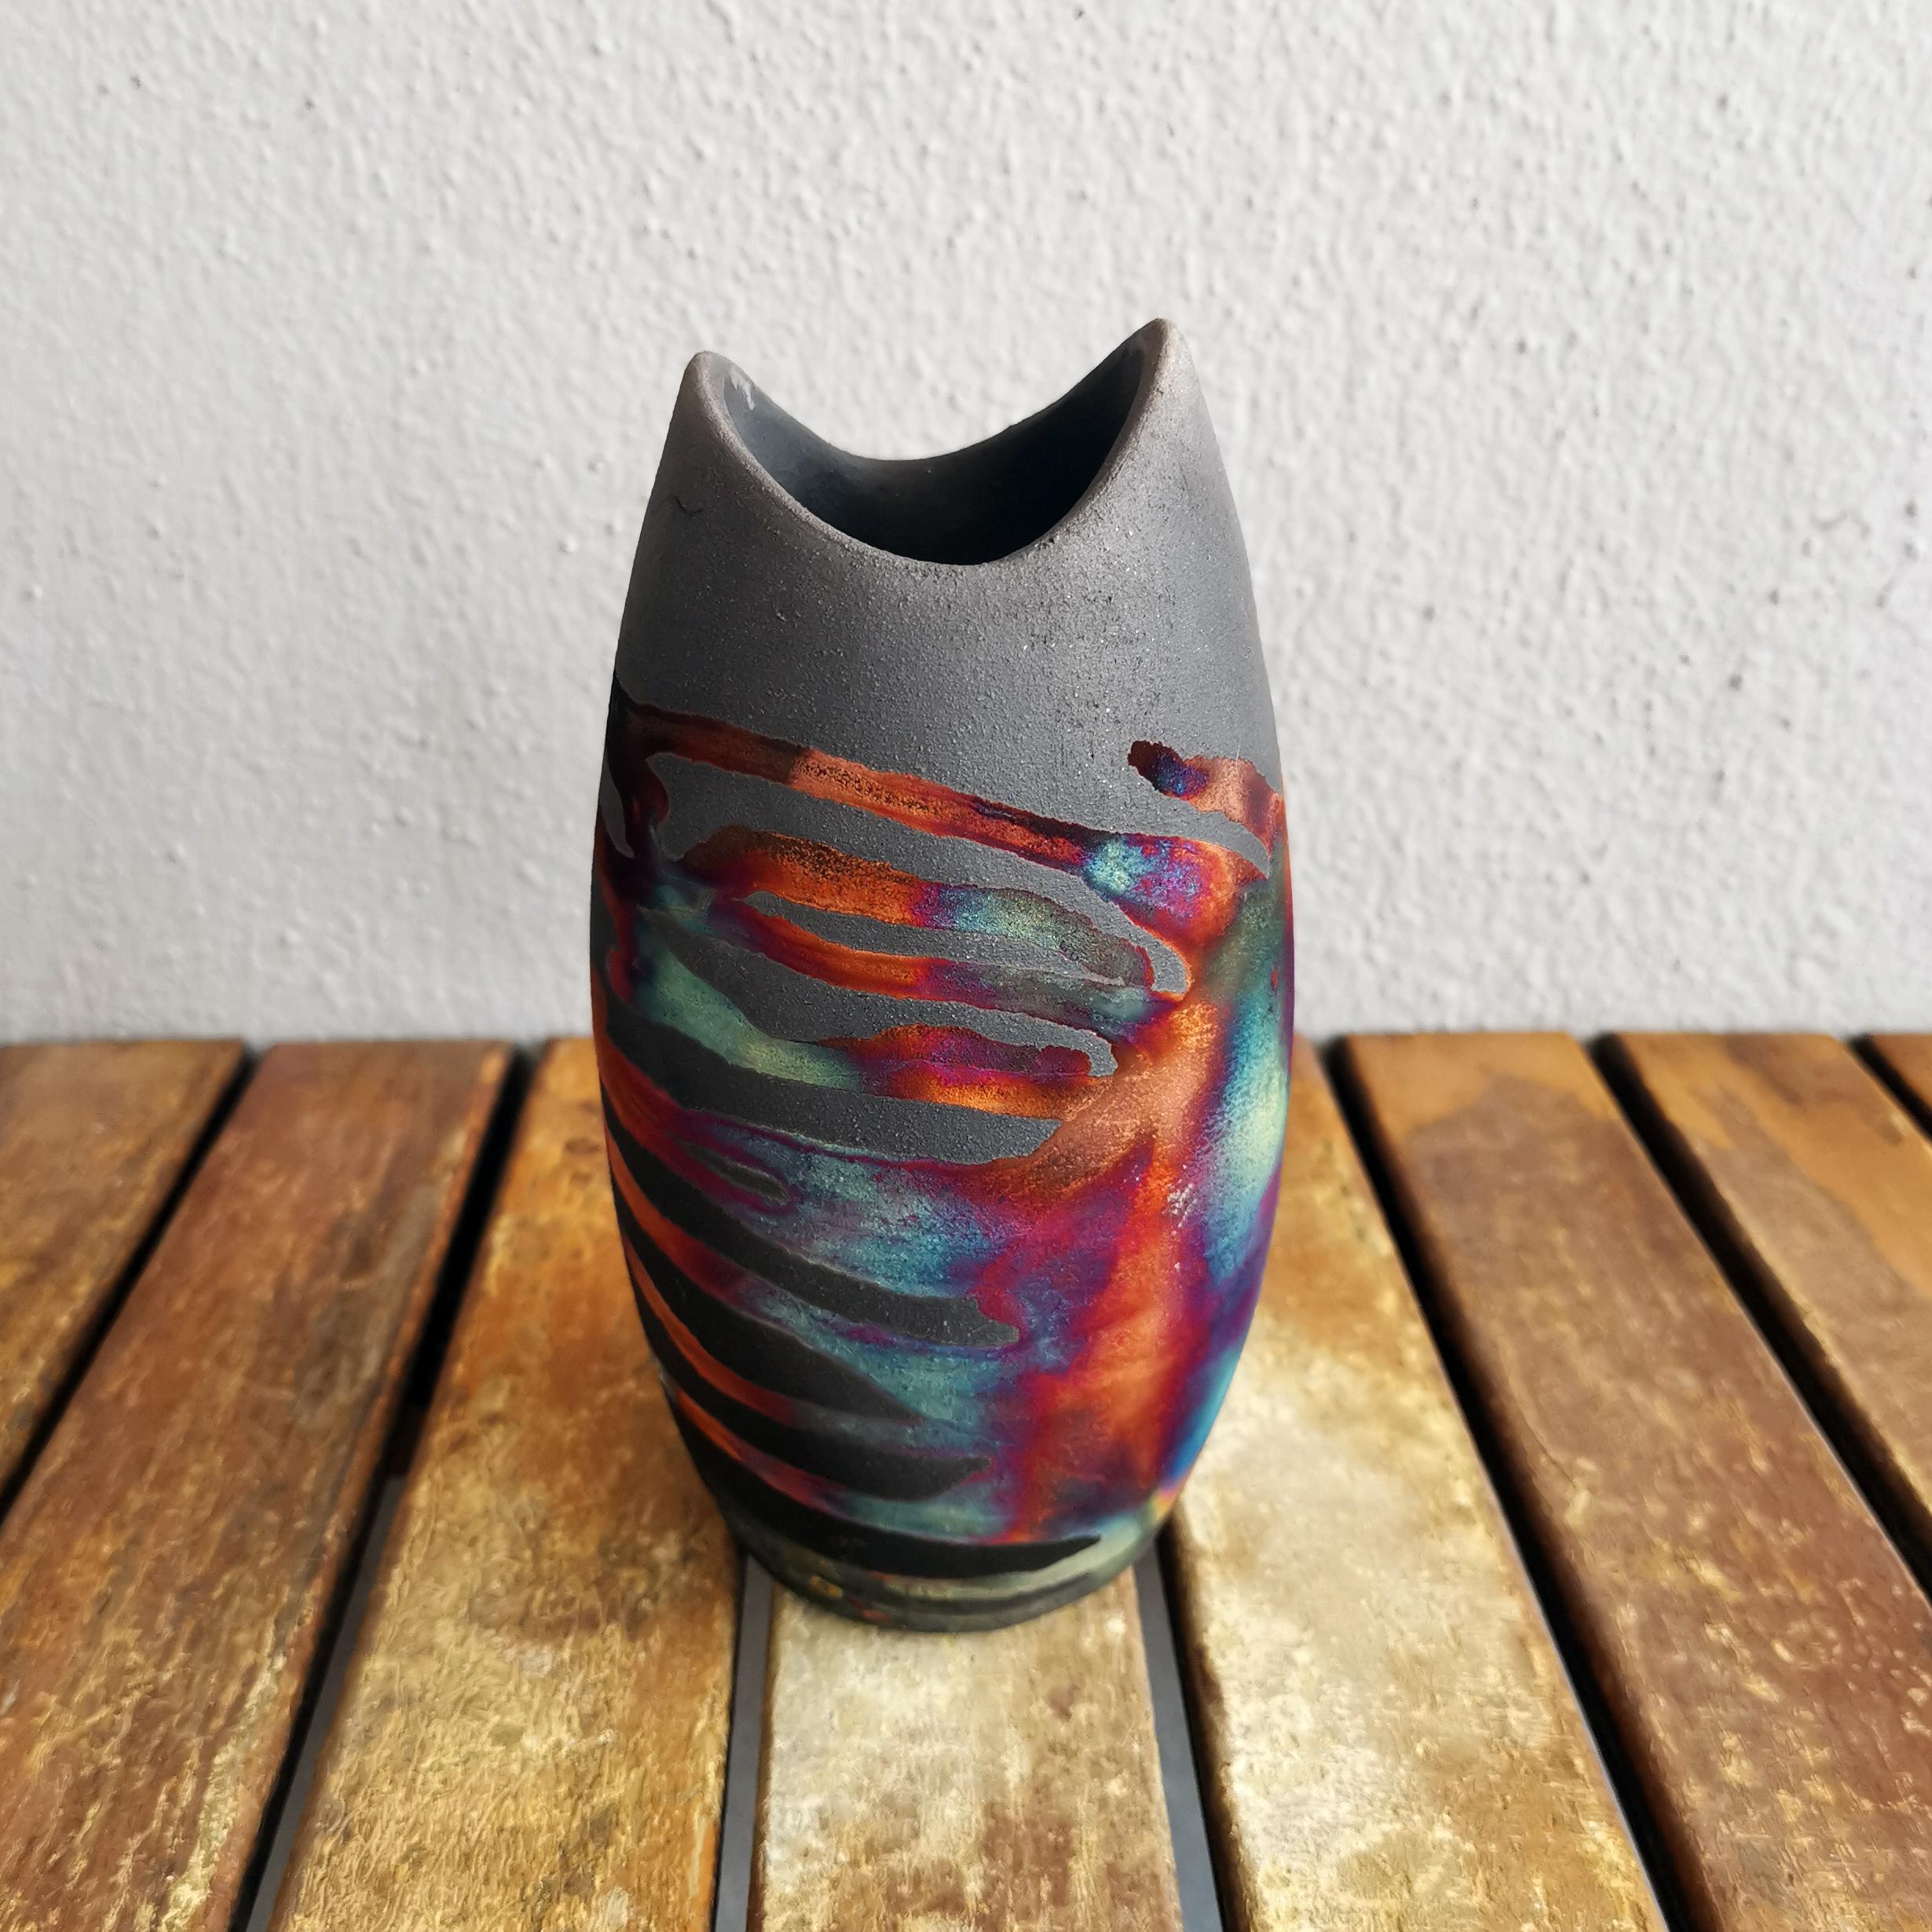 Koi (鯉 ) (n) carp

Our Koi vase is bottle-shaped with a wavy arched mouth which slightly resembles the mouth of a fish. Its eclectic design would blend in well in any interior décor style.

The Koi vase can be displayed on its own or used to hold